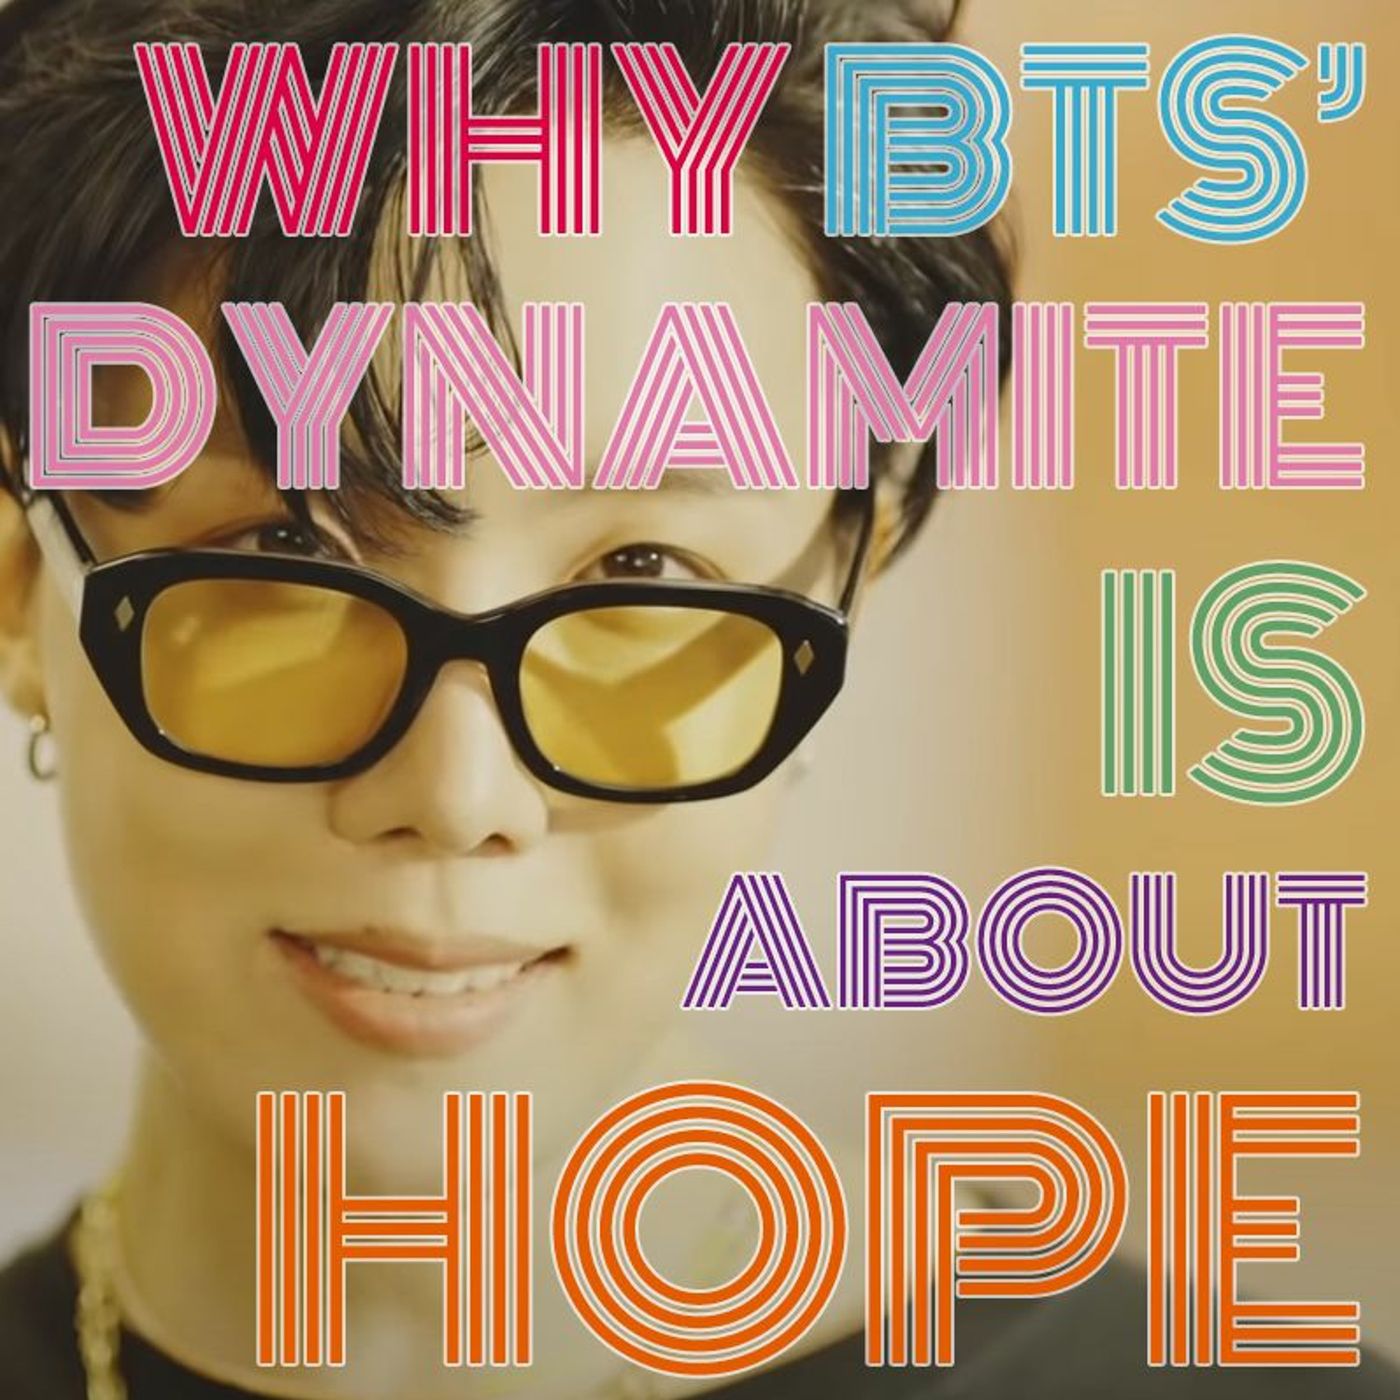 Why BTS’ ”Dynamite” is about Hope